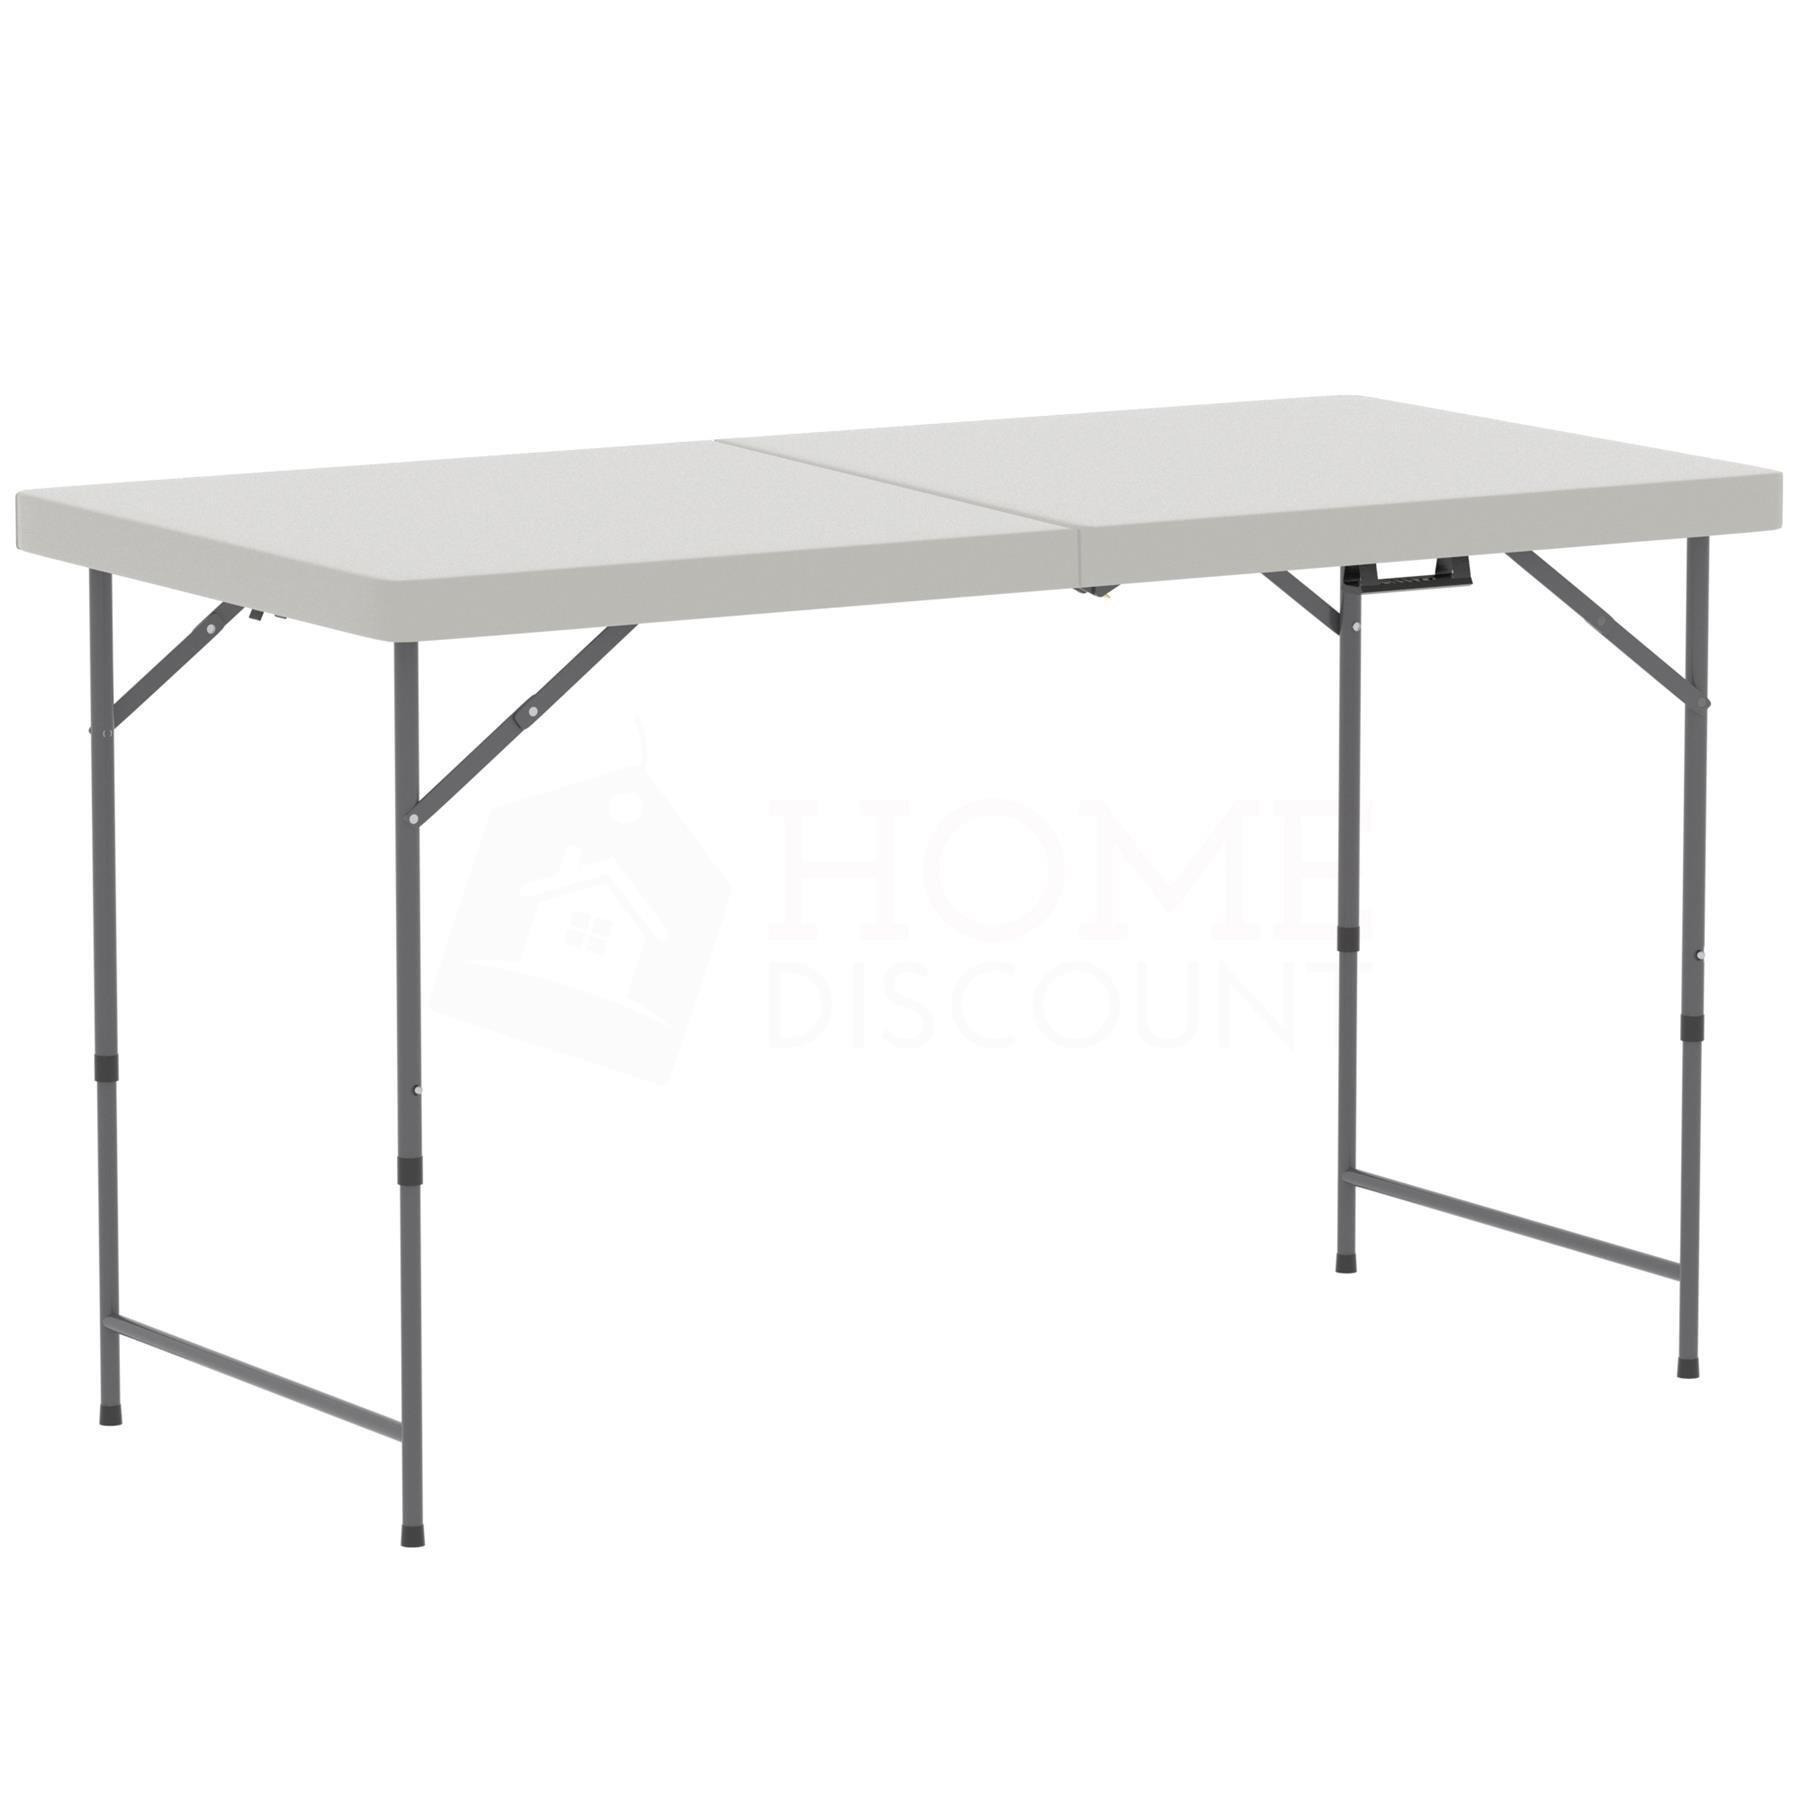 Home Vida Folding Table 4ft Outdoor Garden Foldable Snack Dining Table - image 1